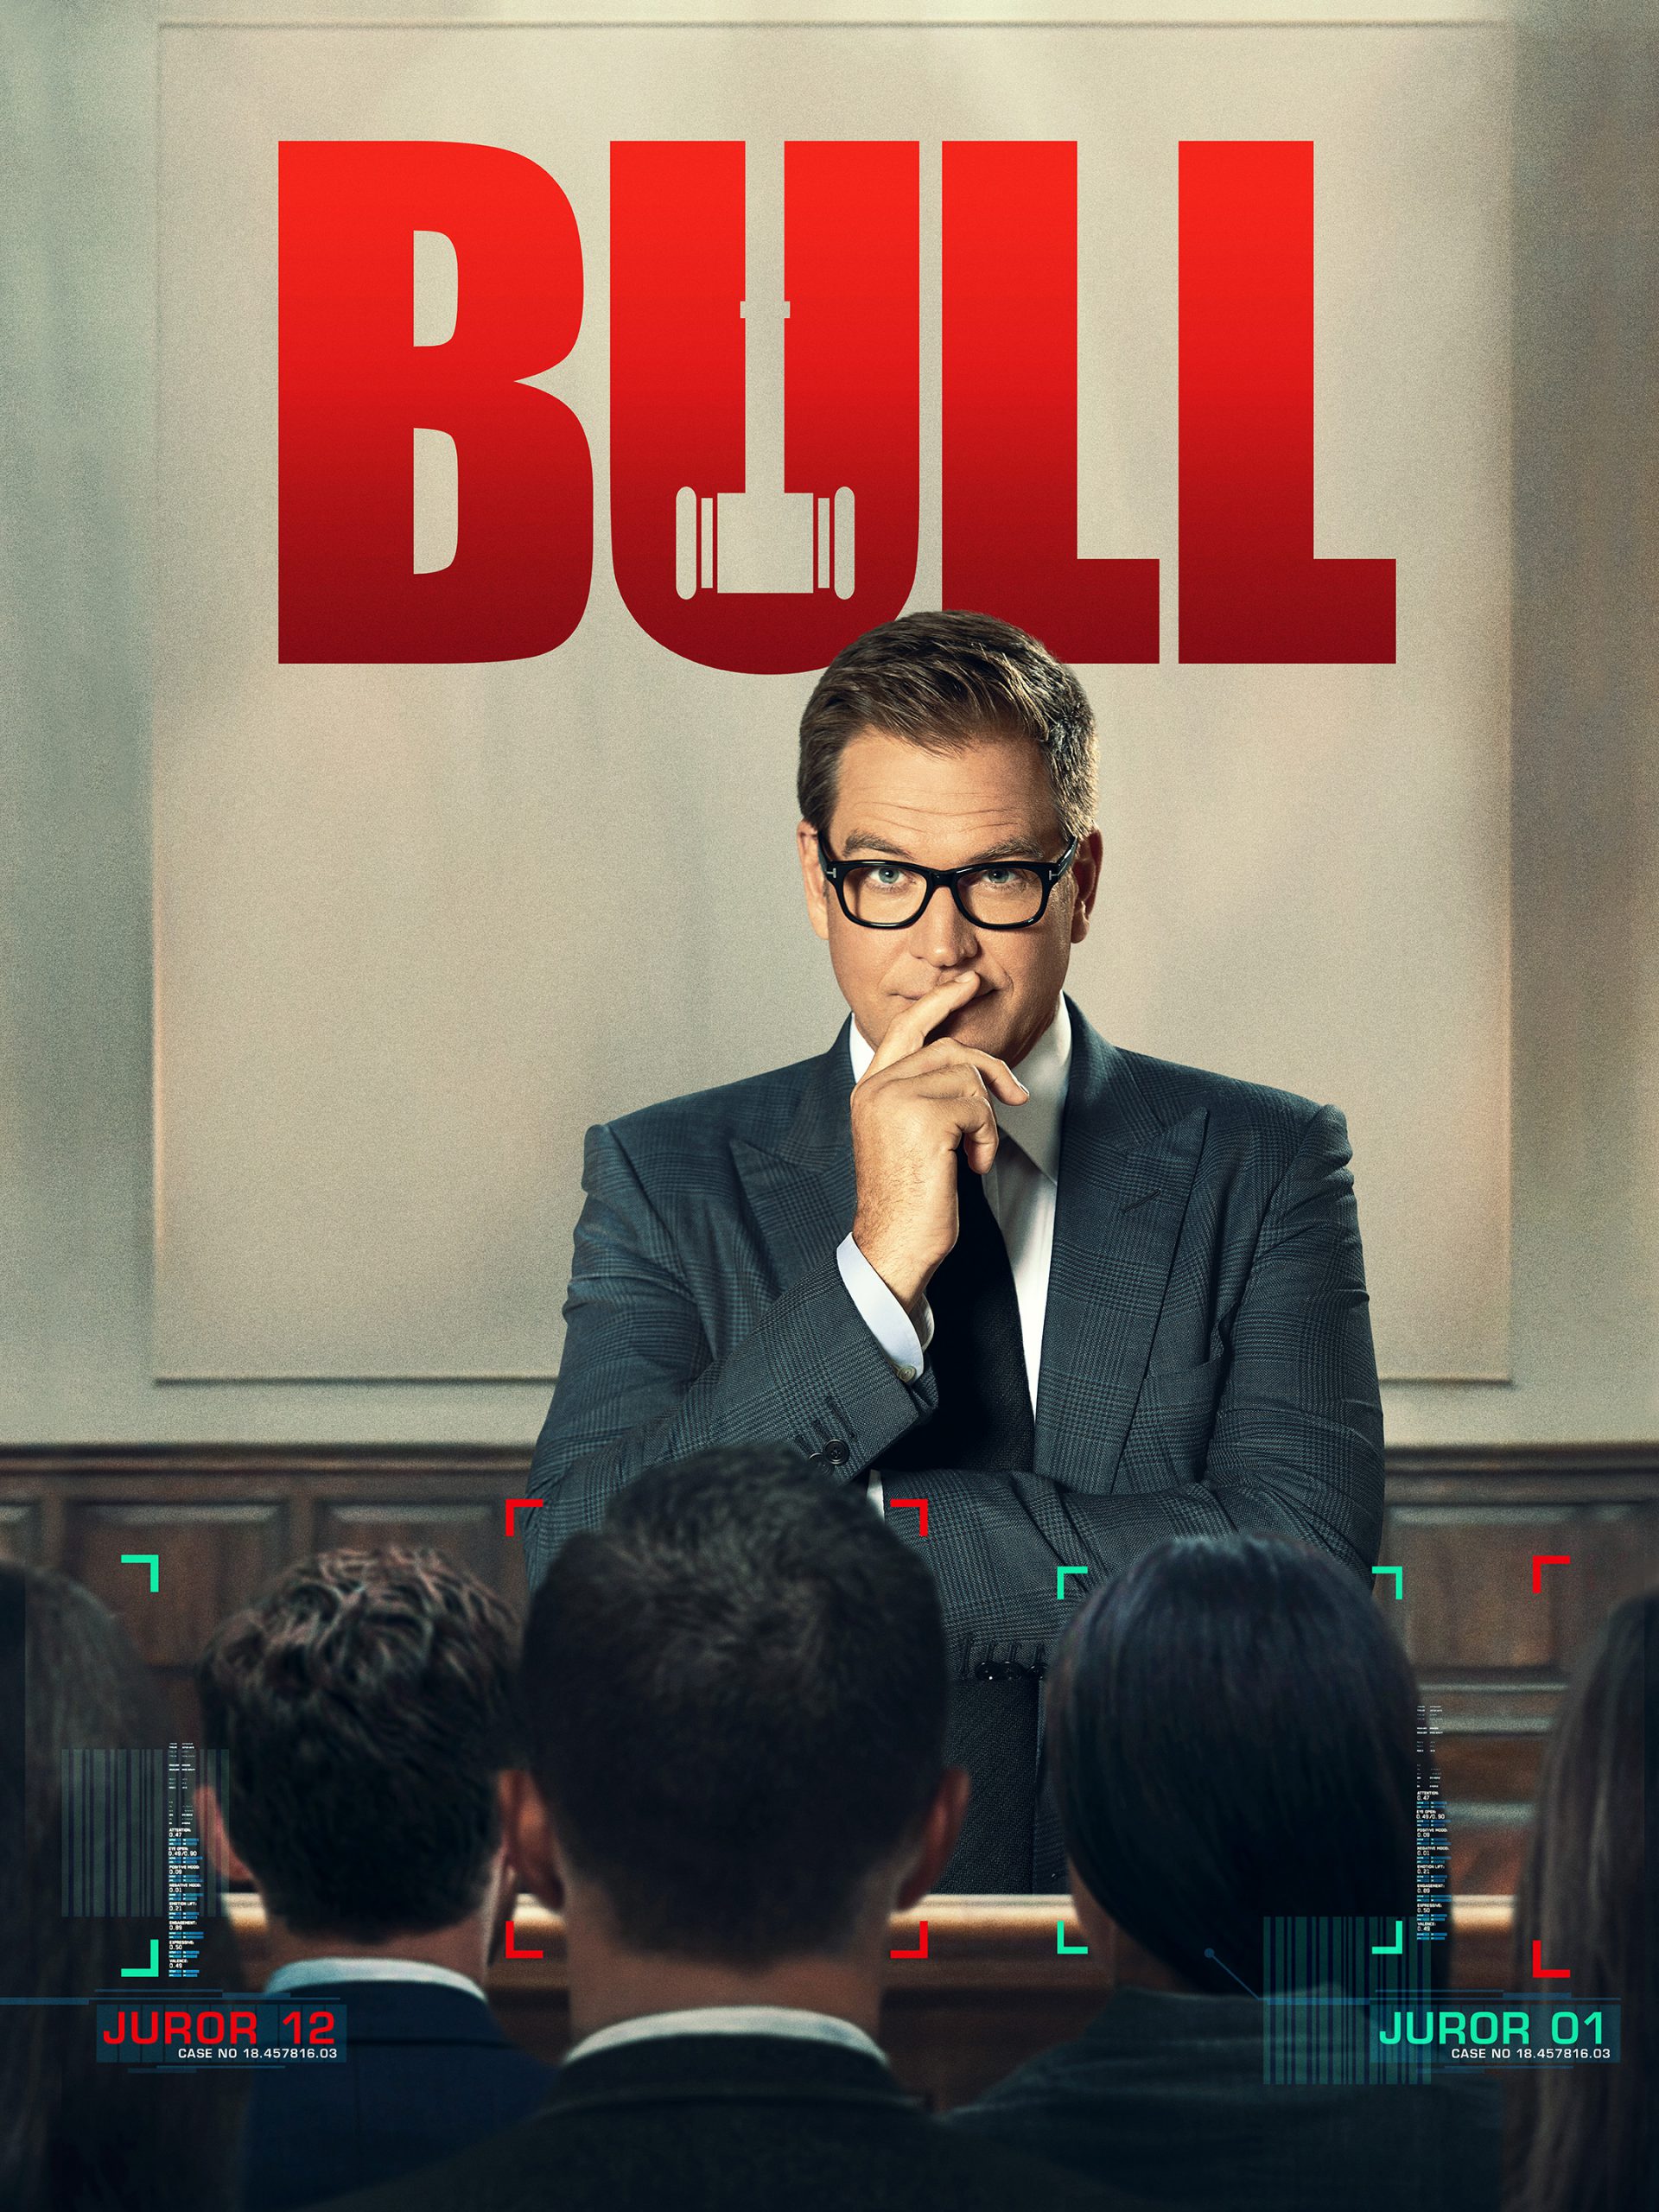 Bull Season 6 coming soon; Everything you should know